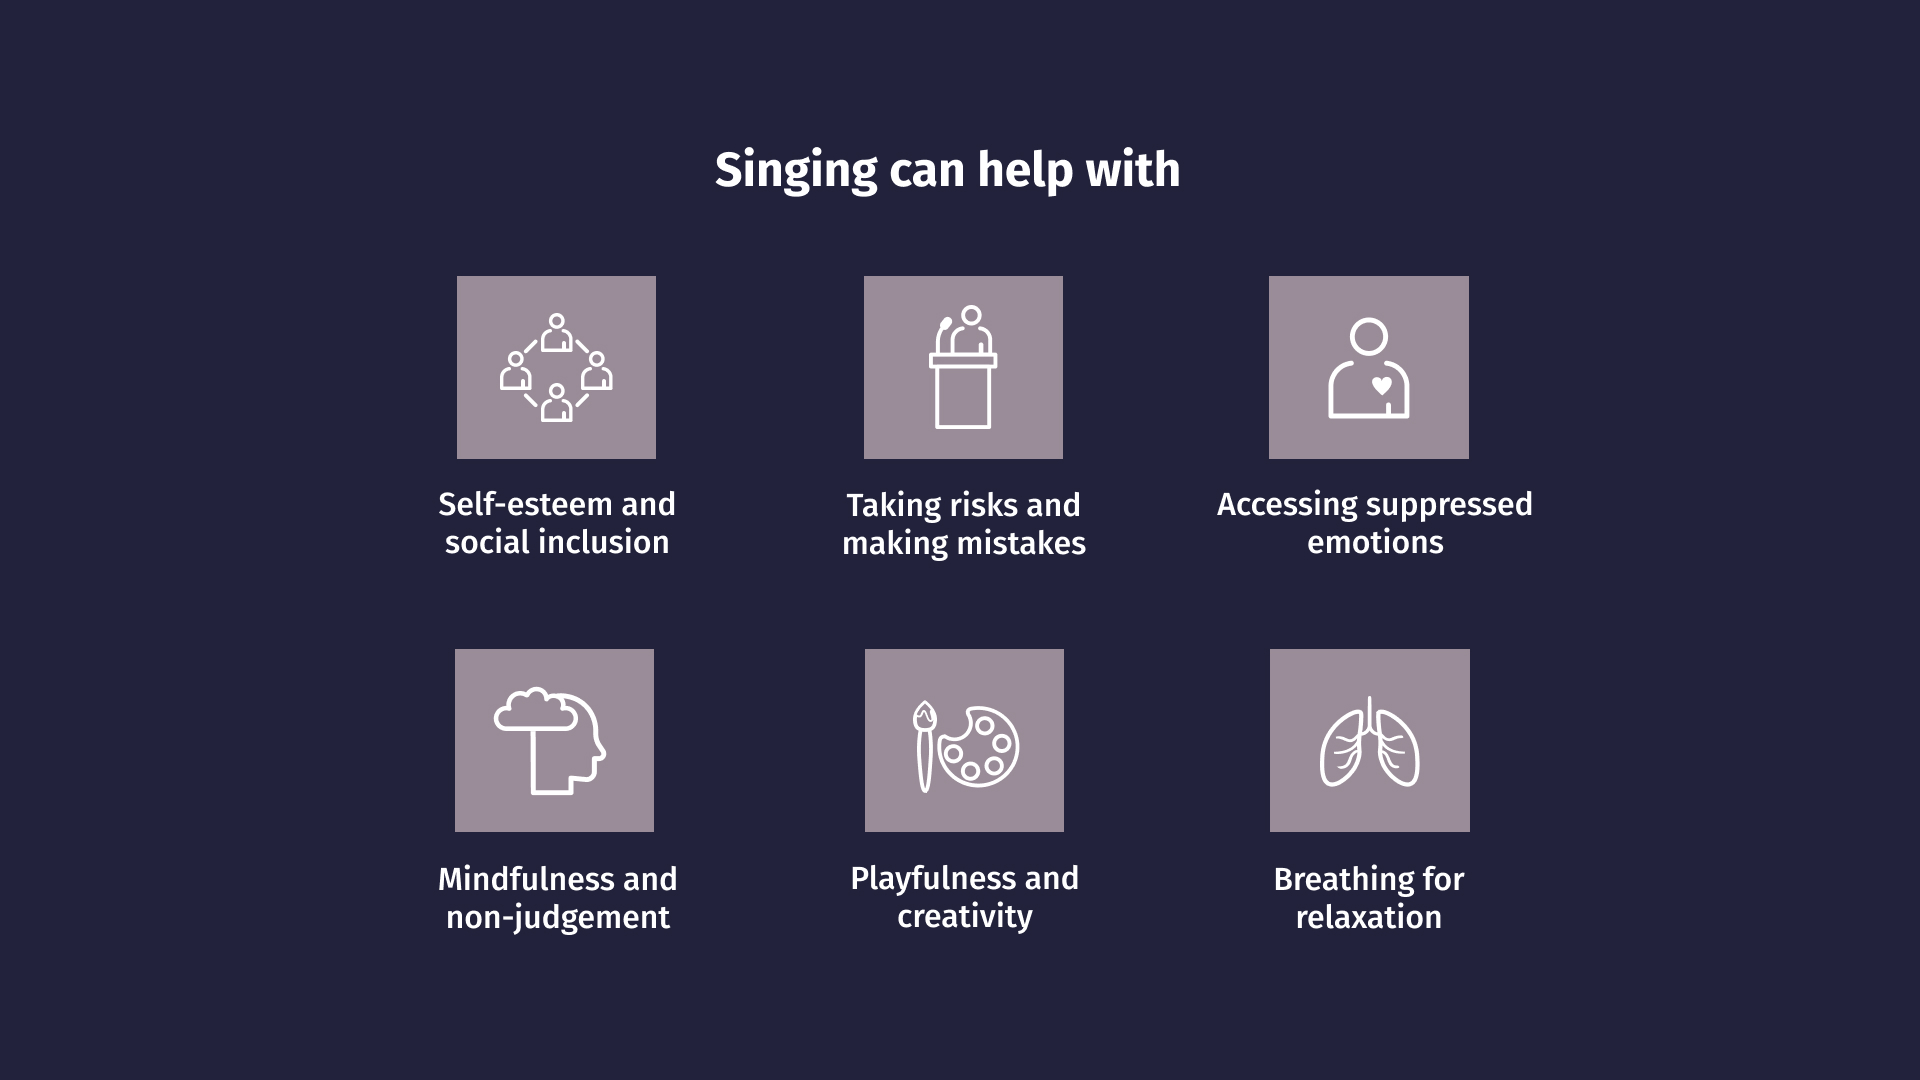 A graphic listing the benefits of singing with icons